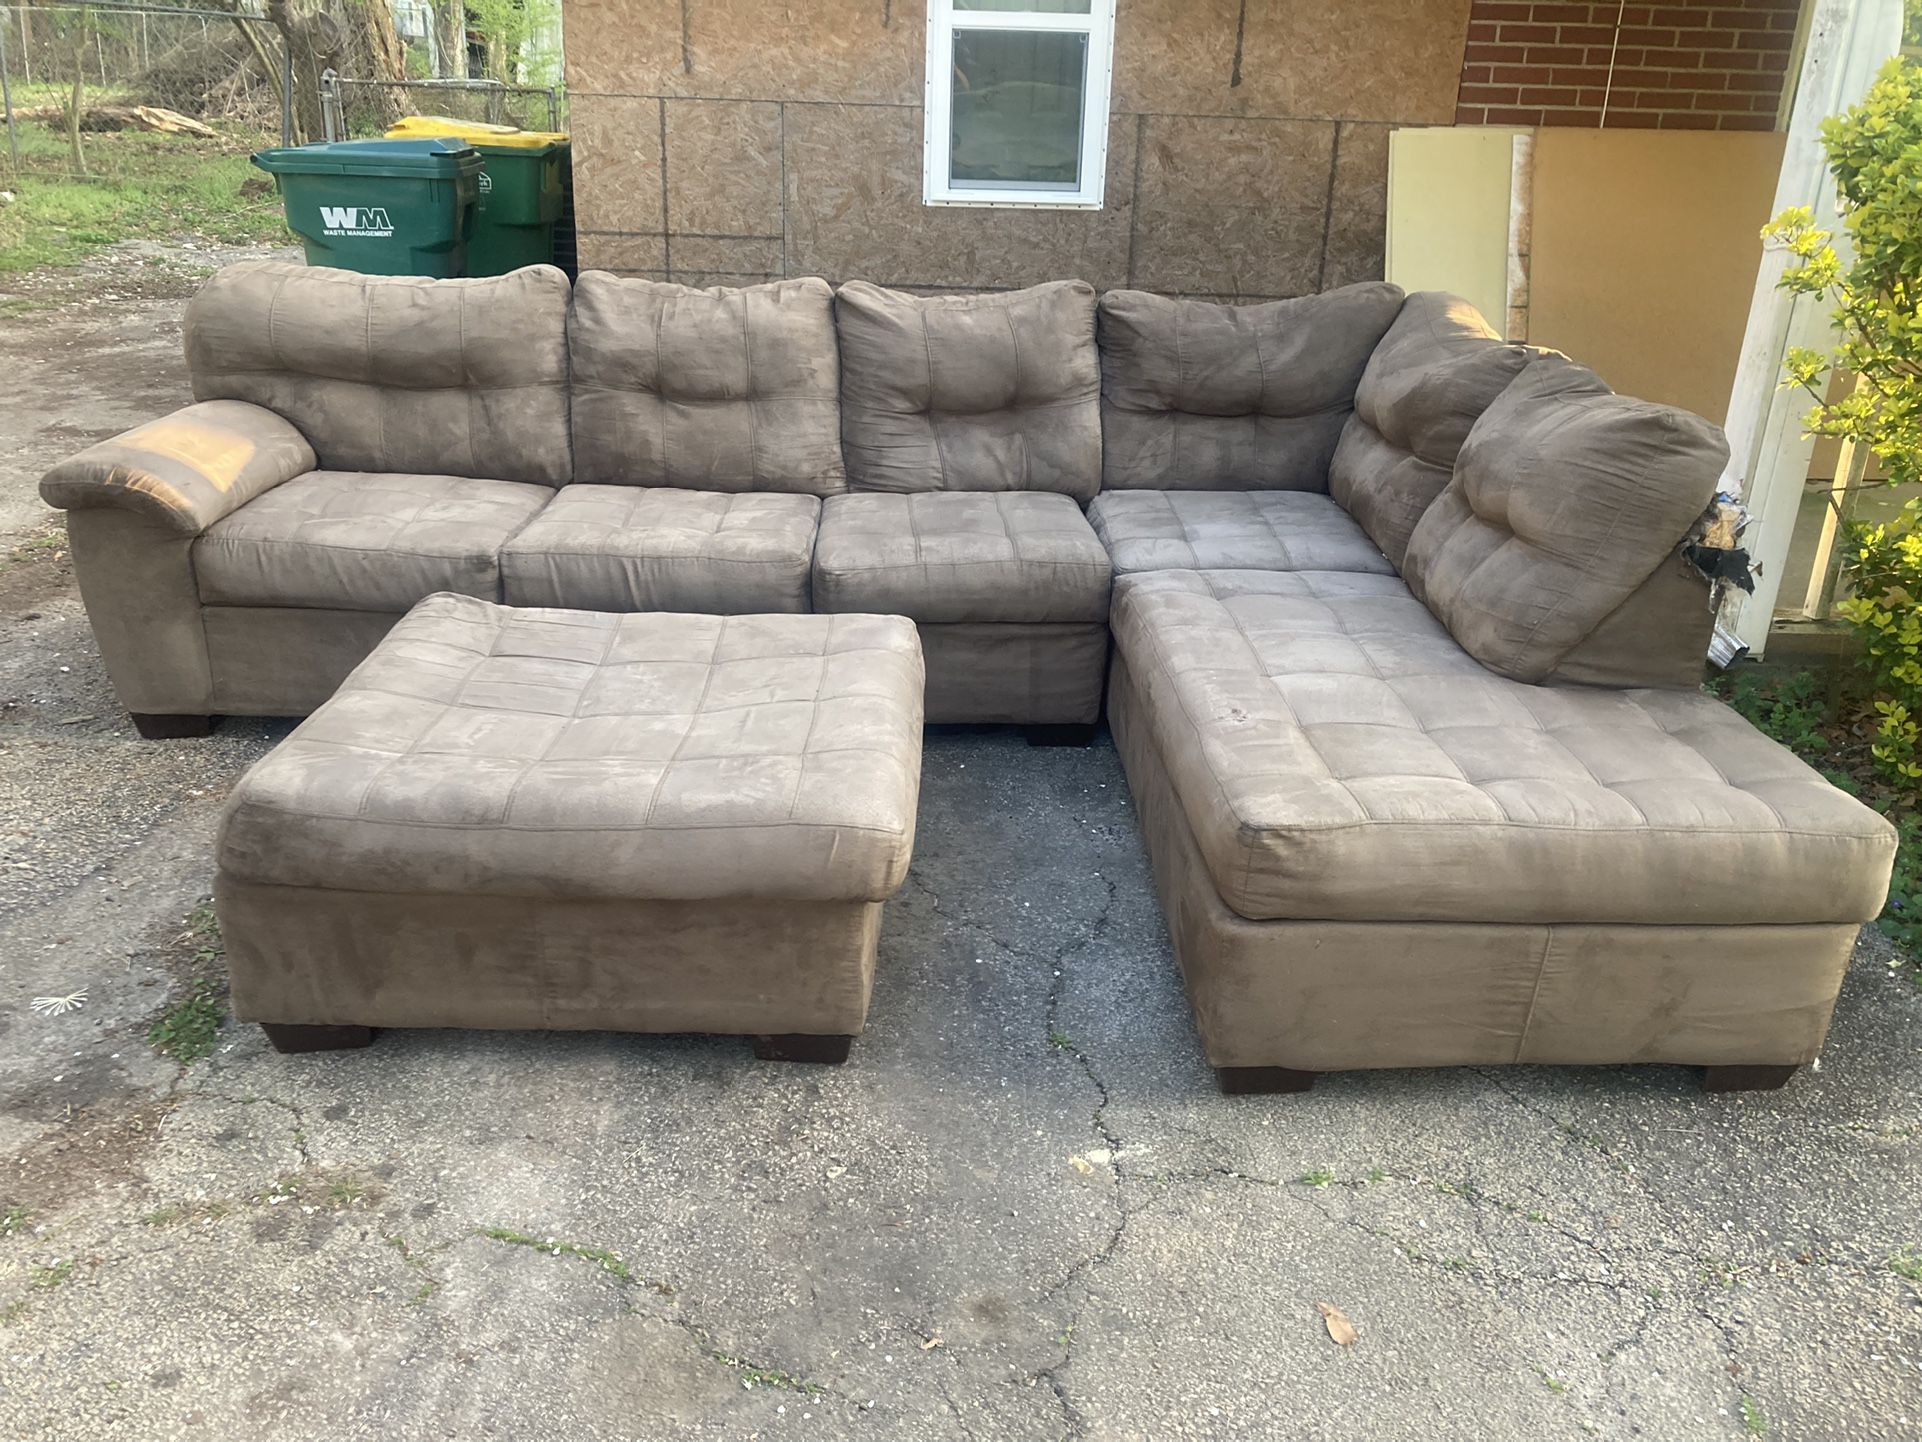 HAVERTYS PLUSH USED KHAKI/TAN 2PC SECTIONAL SET & OTTOMAN…$199 OBO…ALL OFFERS WELCOME!!